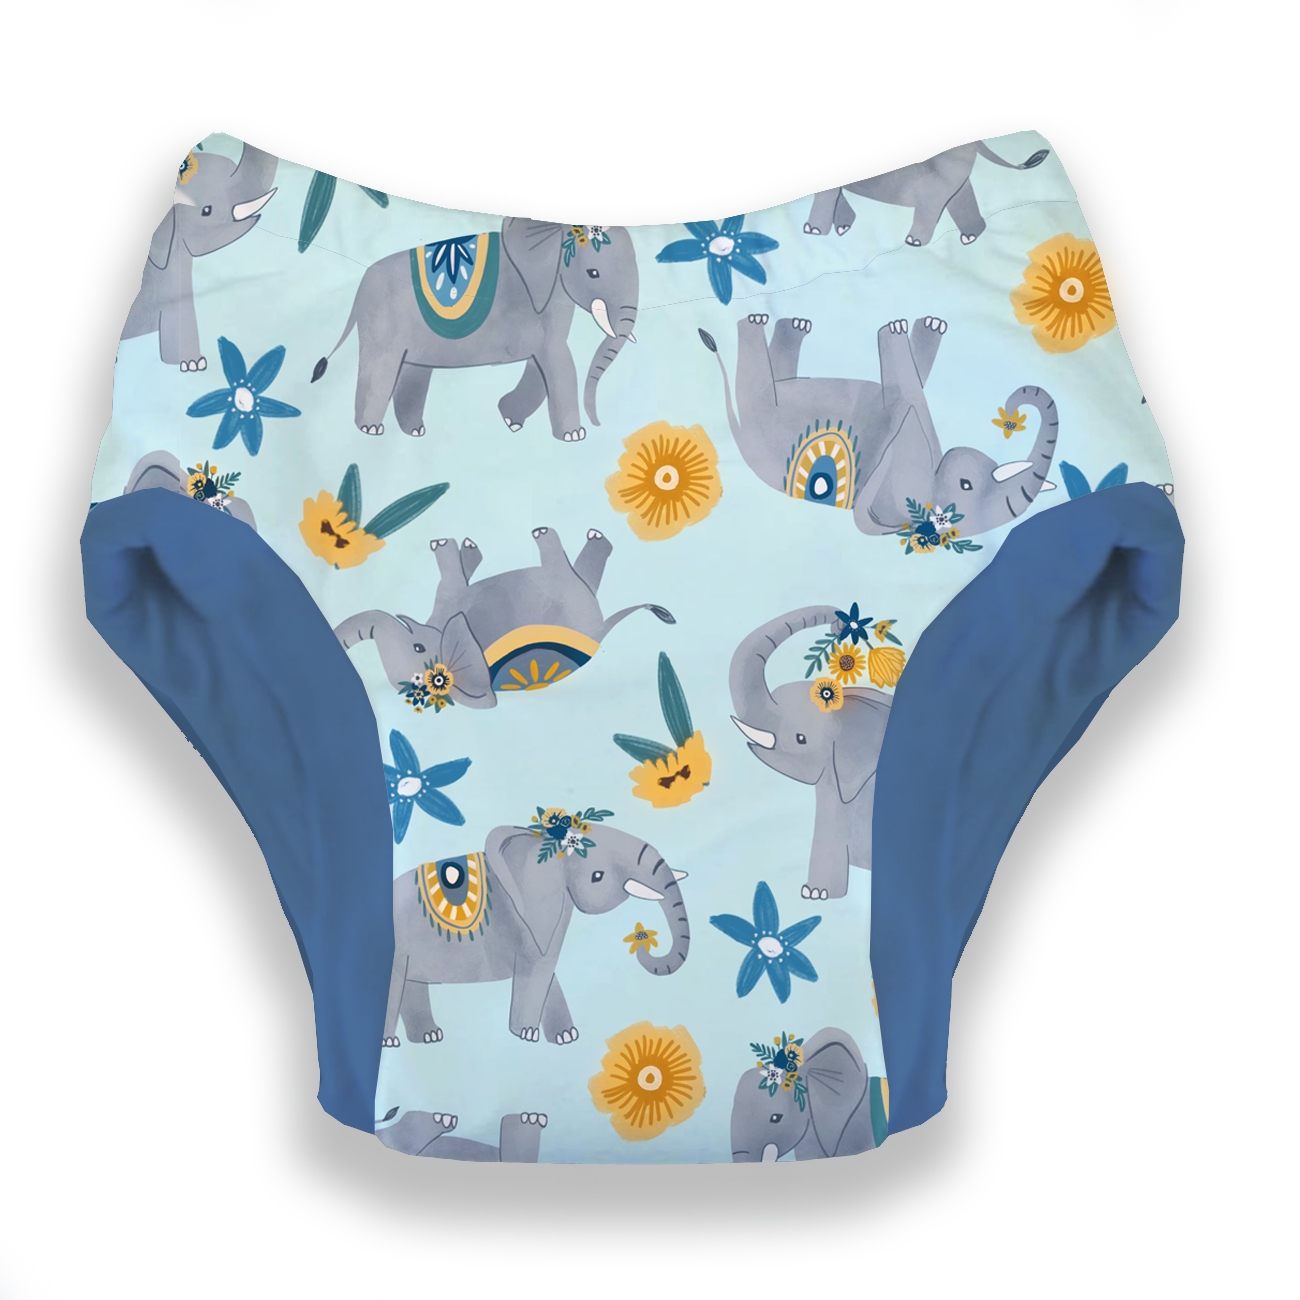 The 10 Best Potty Training Pants Of 2023 | lupon.gov.ph